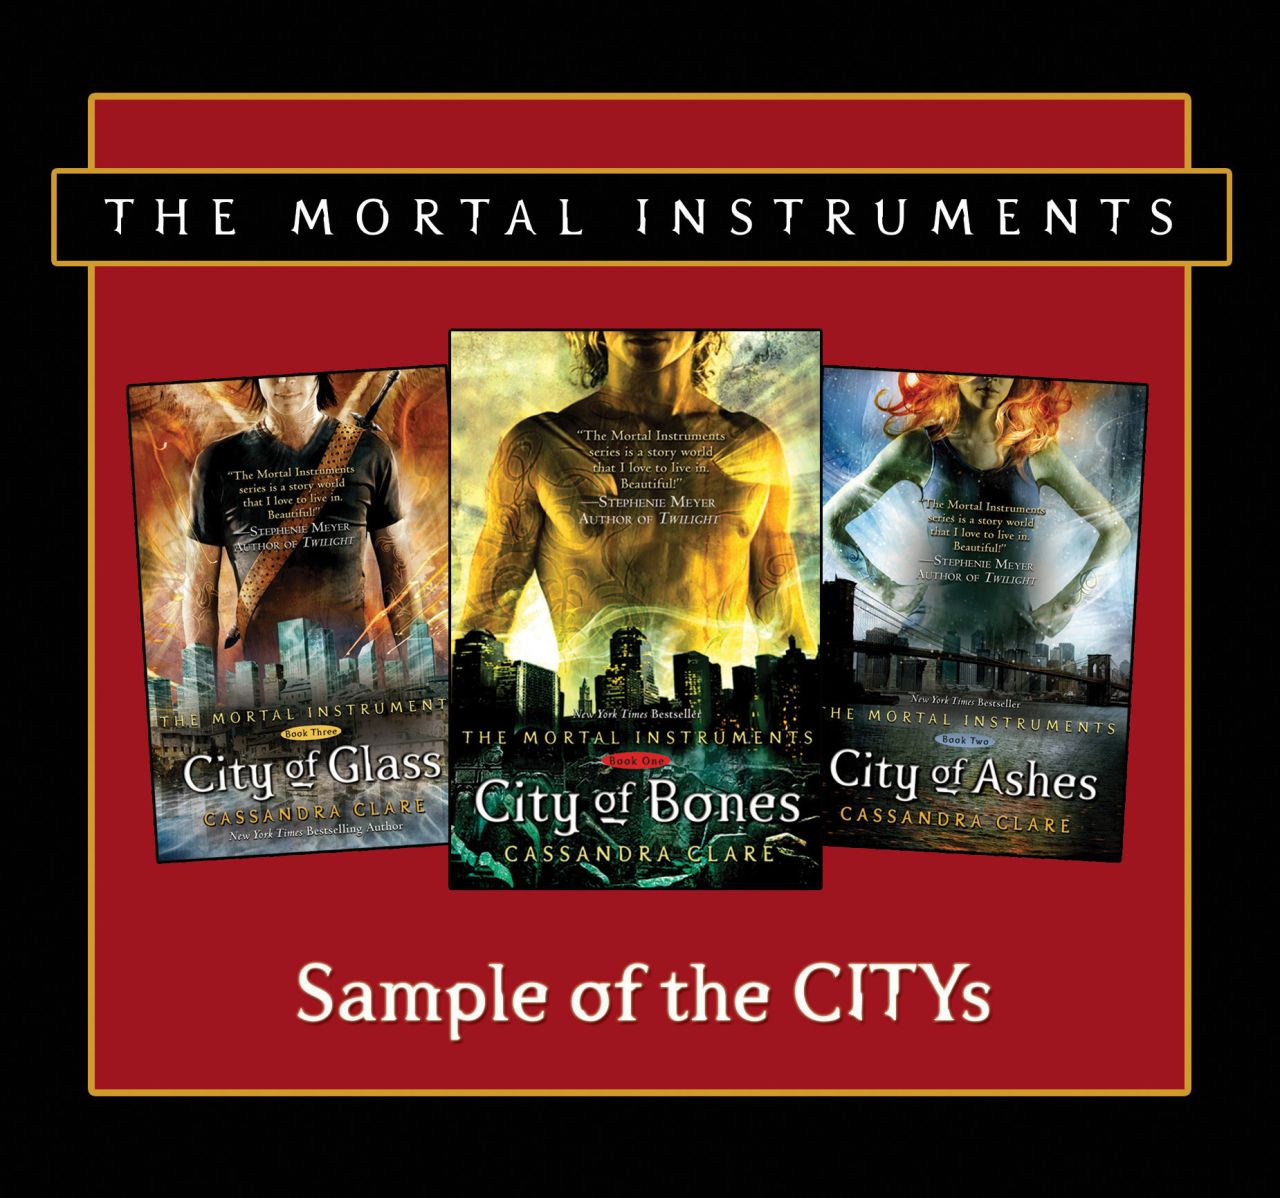 <strong>Book or movie? </strong>So far, the books are better. While Clare's work has landed on the New York Times best-seller list, "Mortal Instruments: City of Bones" had a rating of just 12% fresh on RottenTomatoes.com. 